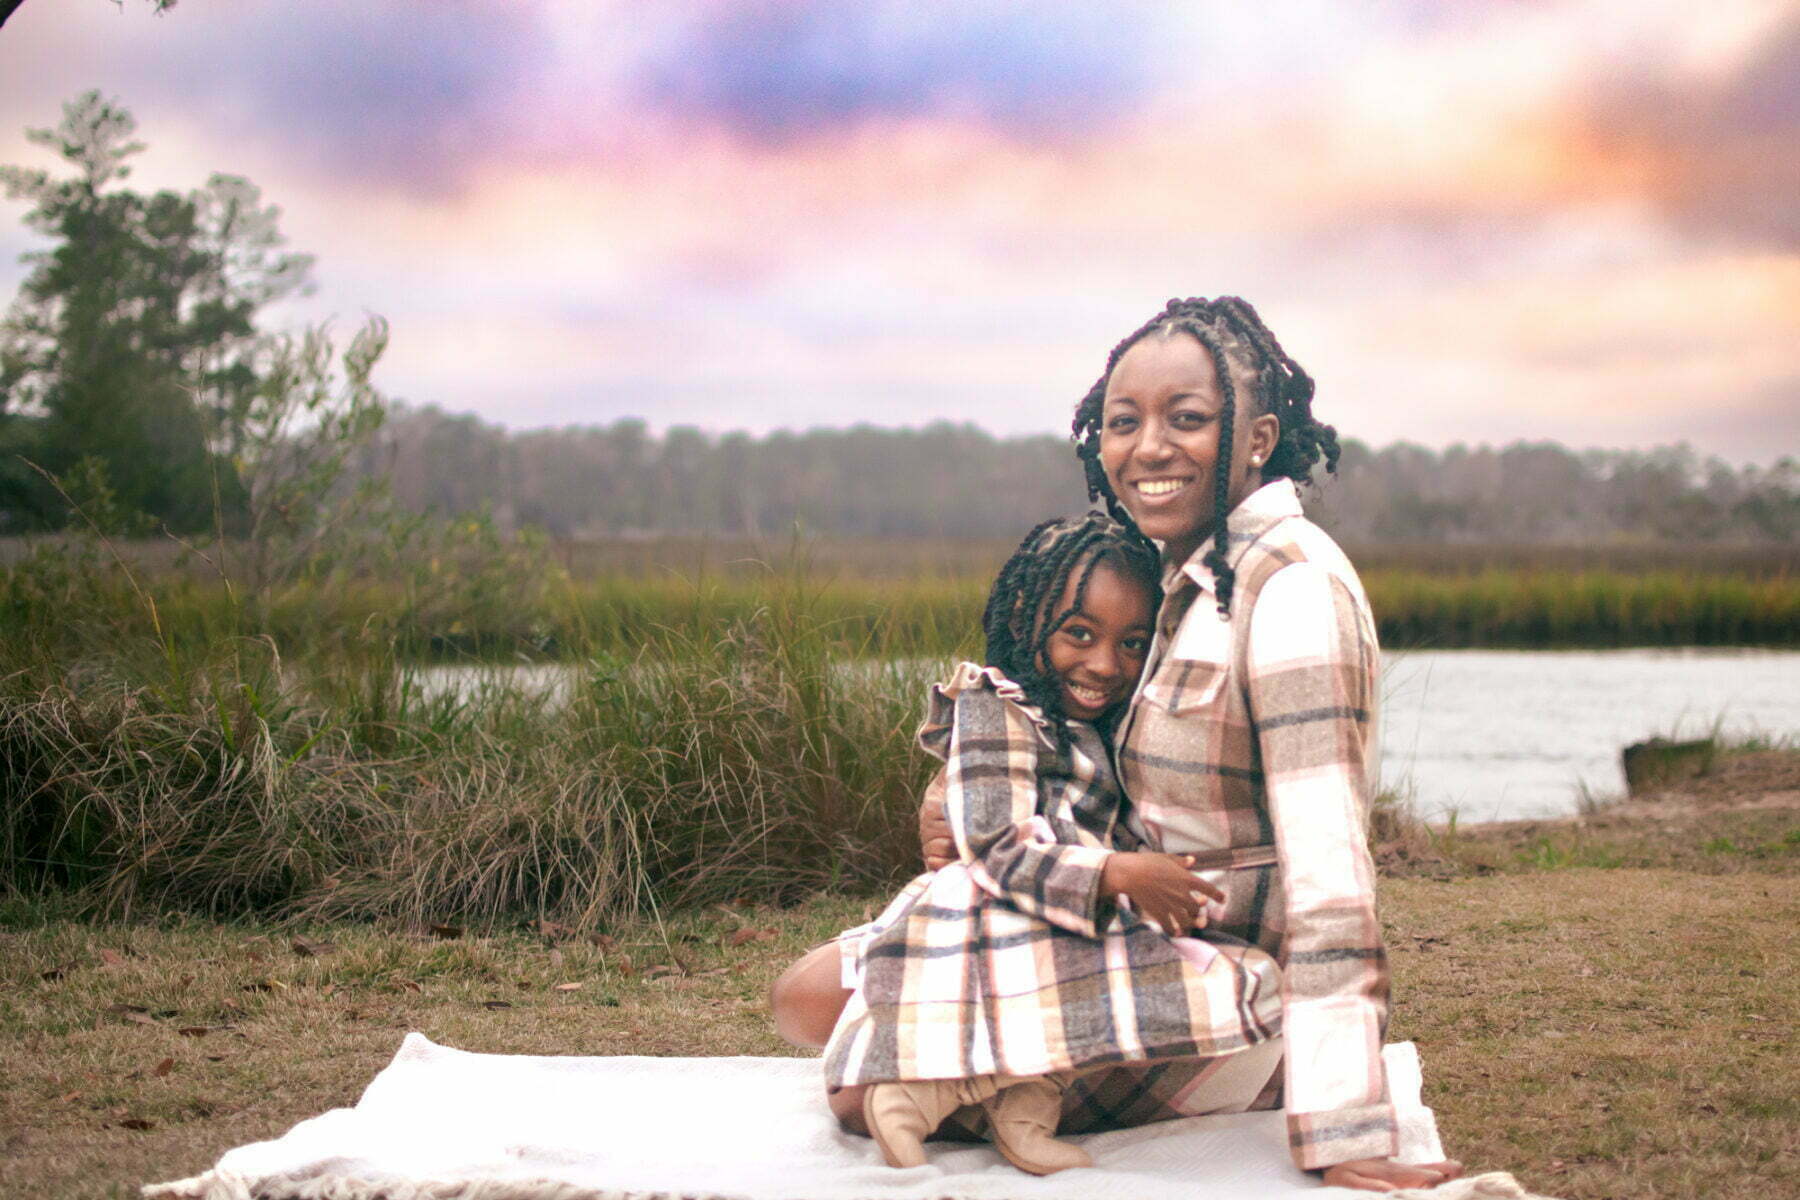 Mother and daughter lifestyle family portrait photography session Shallotte, NC.